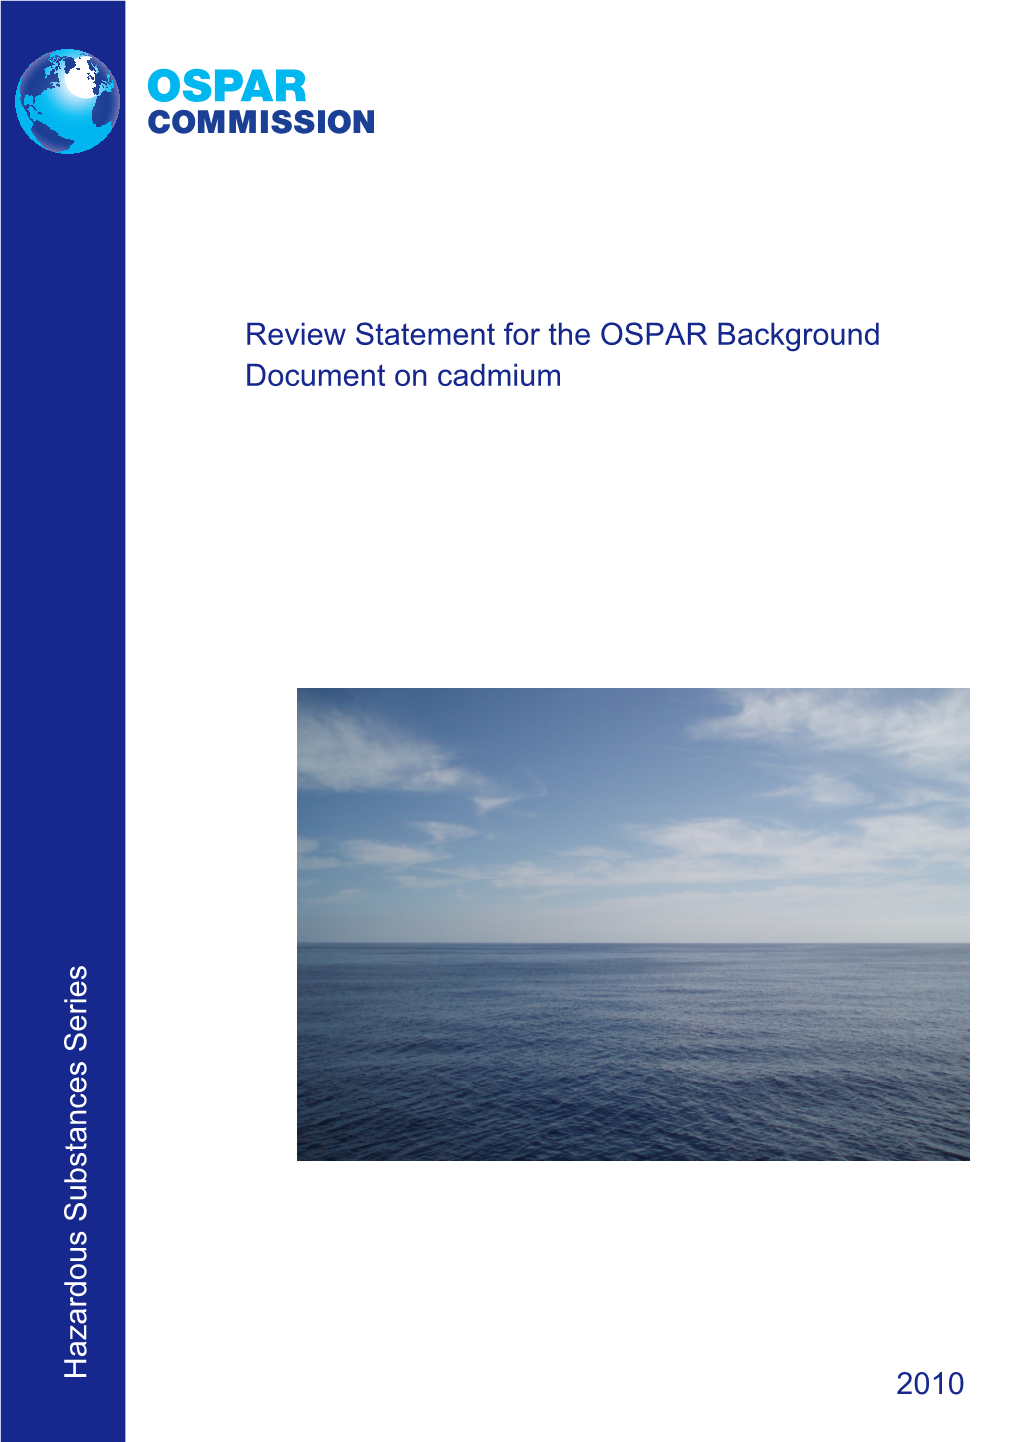 Review Statement for the OSPAR Background Document on Cadmium